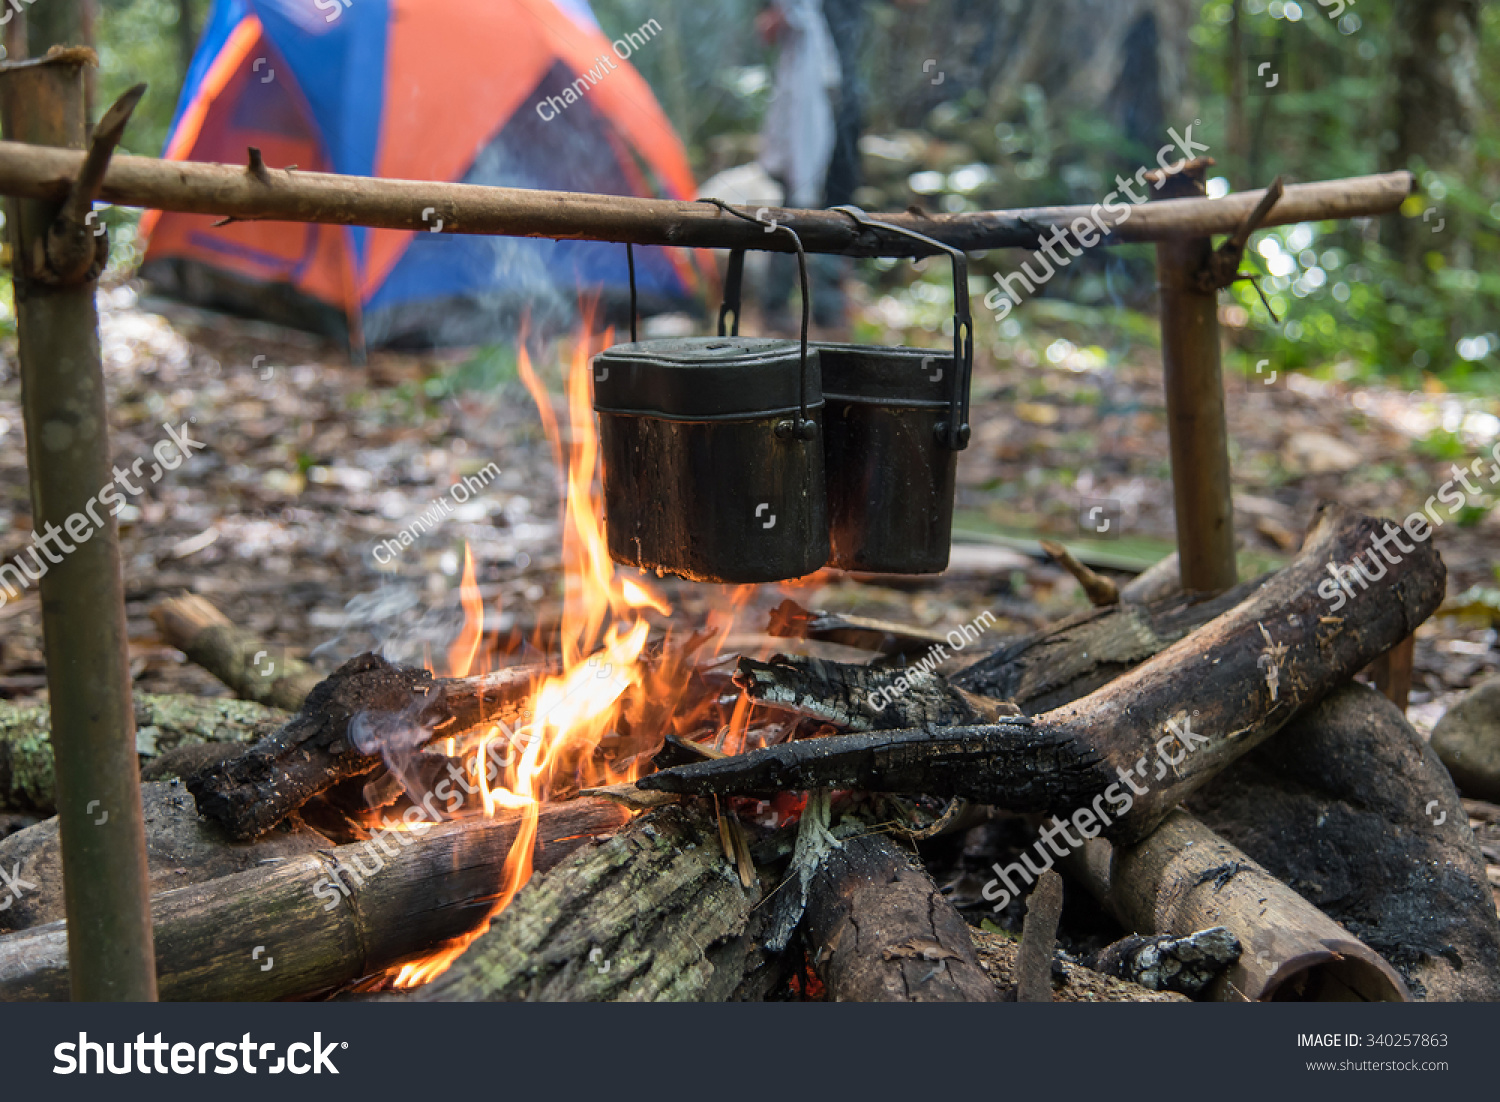 Rice cooking with army pot by using bonfire while camping in the forest. #340257863